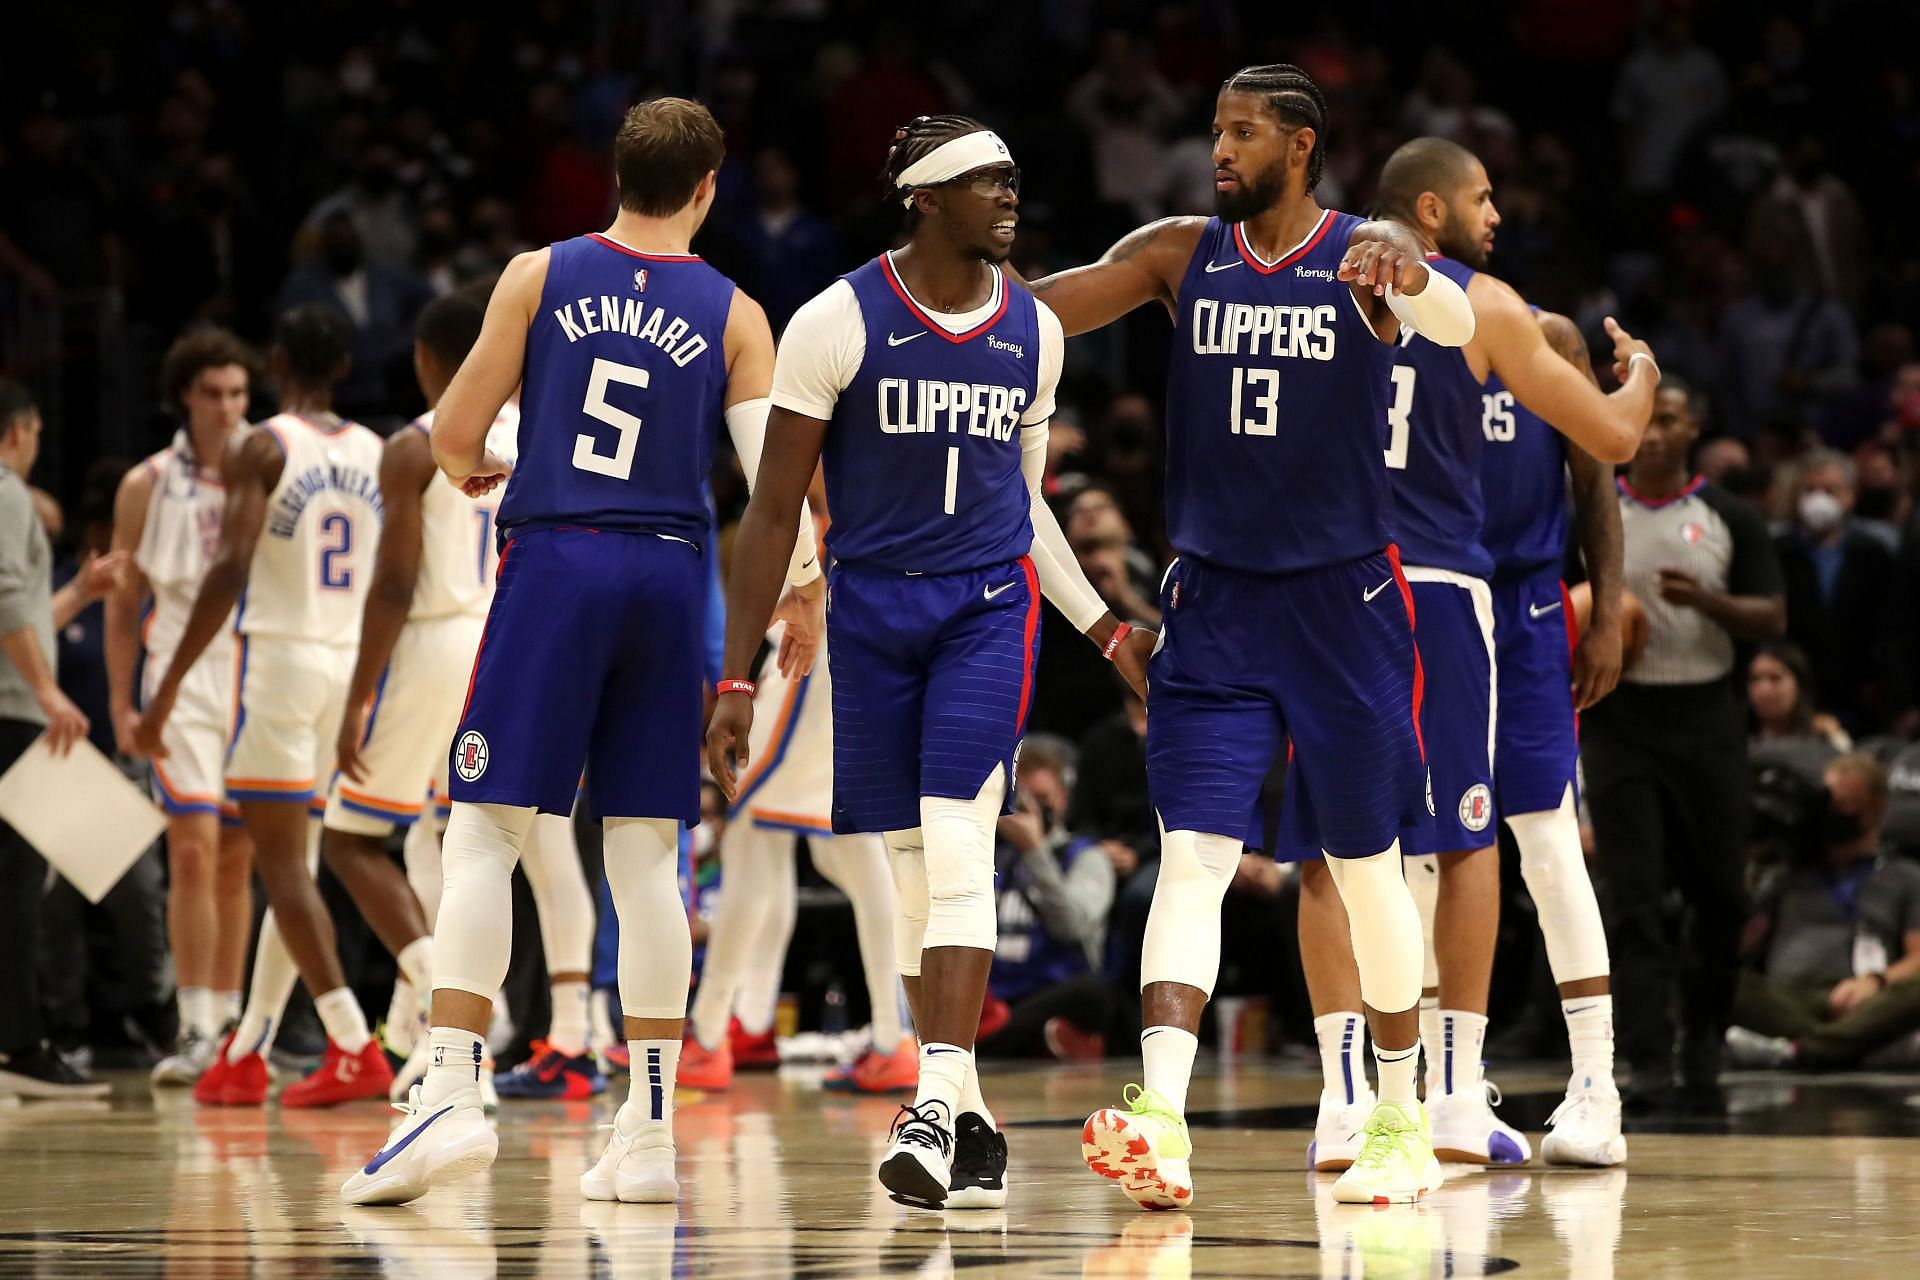 The LA Clippers celebrate a play against the Oklahoma City Thunder